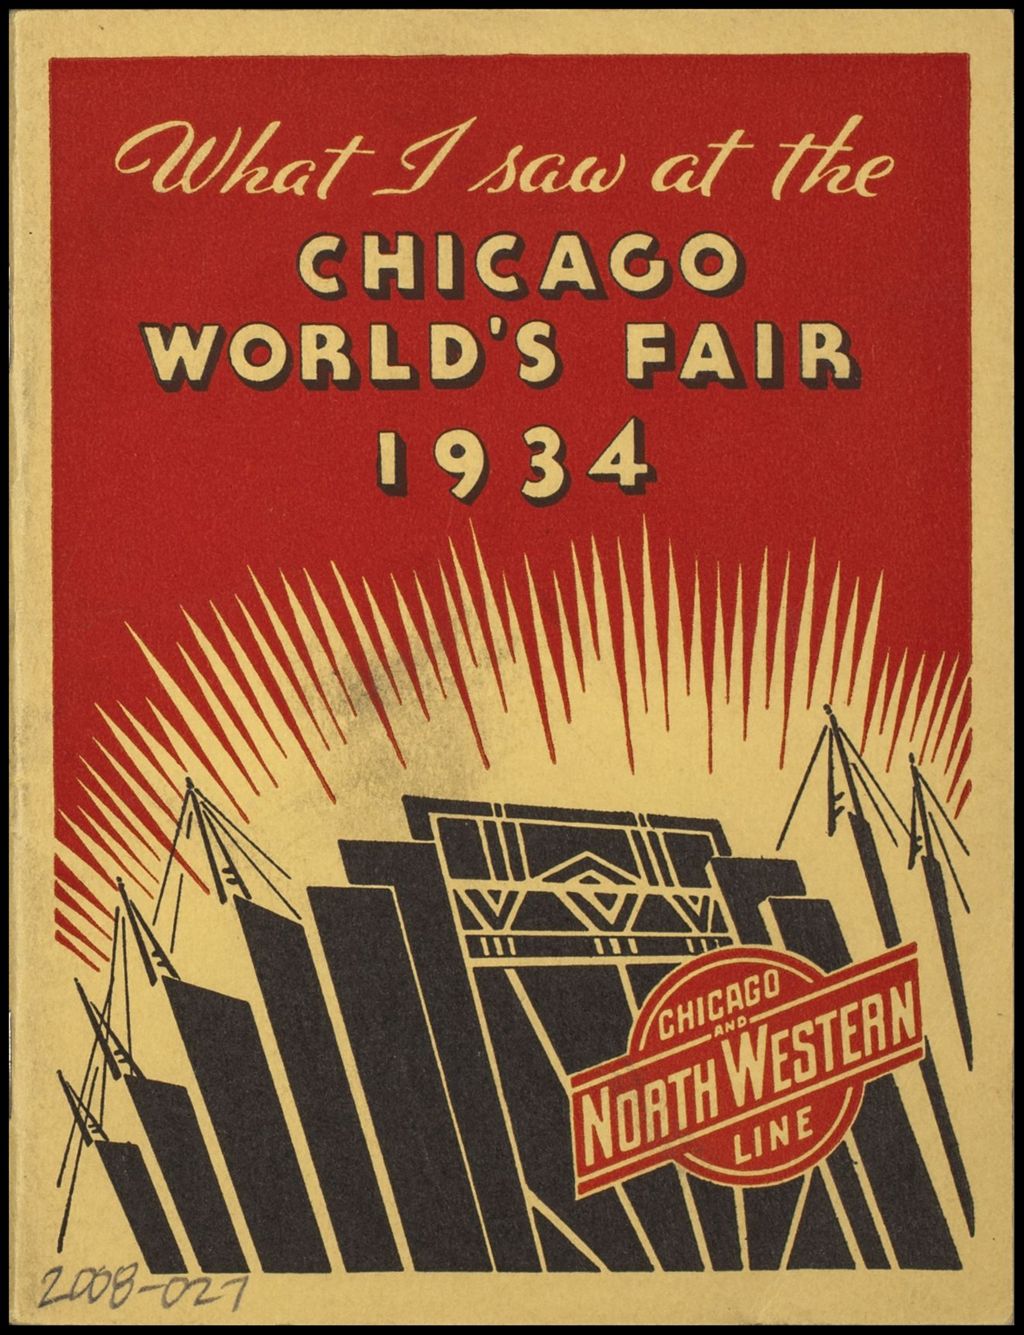 Miniature of Souvenir "What I Saw at the Chicago World's fair, 1934 booklet